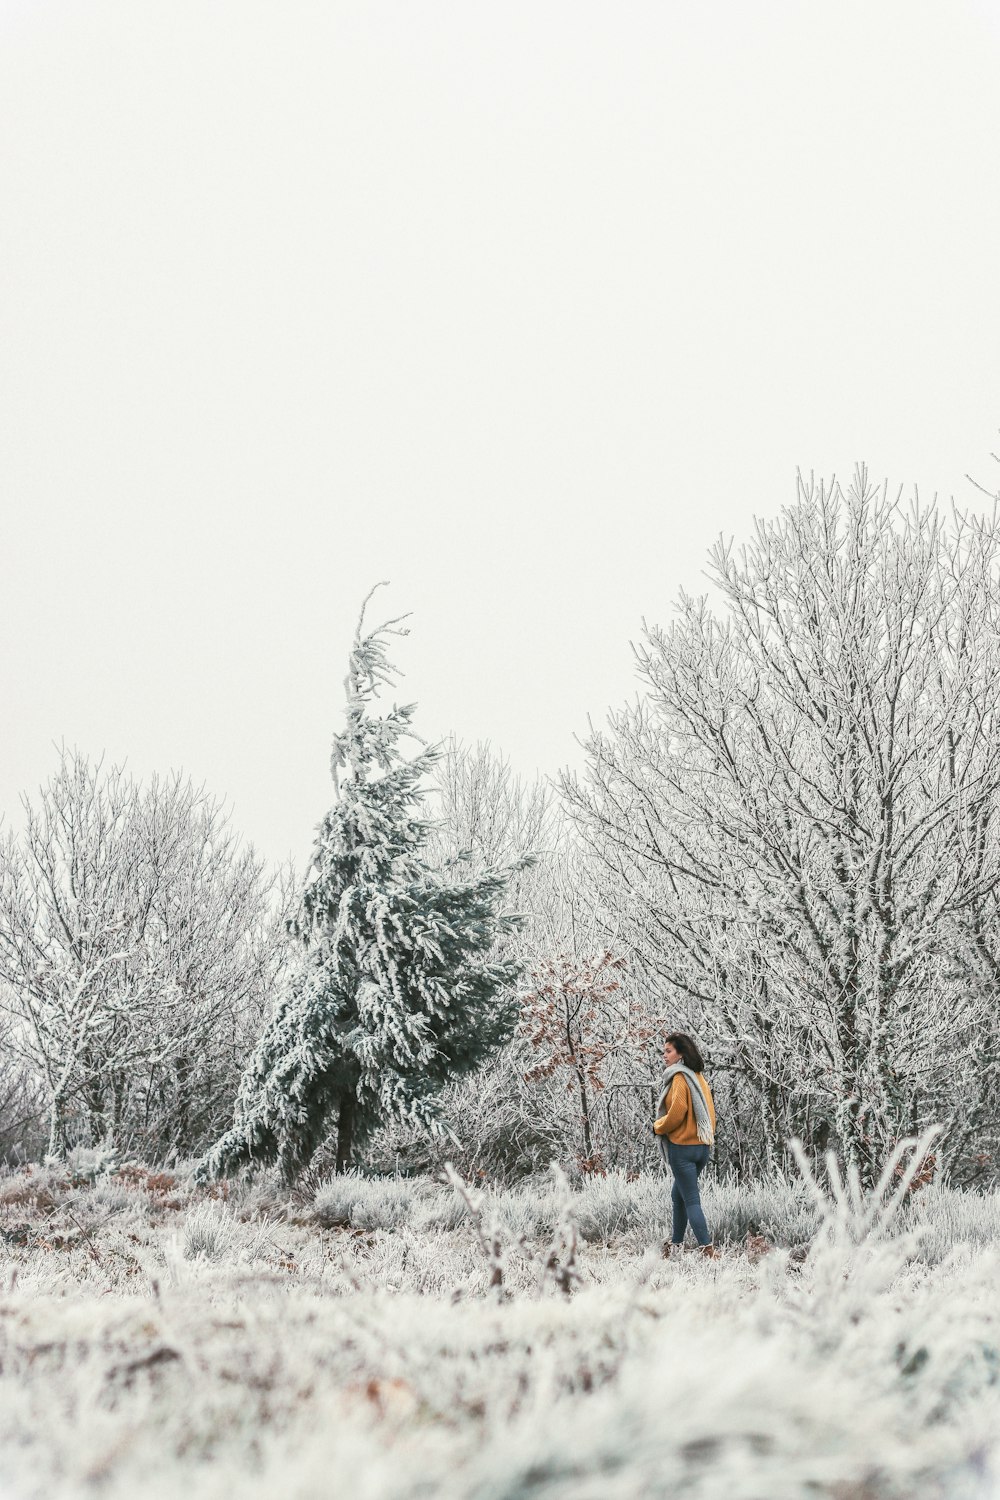 man in red jacket and blue denim jeans standing on snow covered ground near trees during